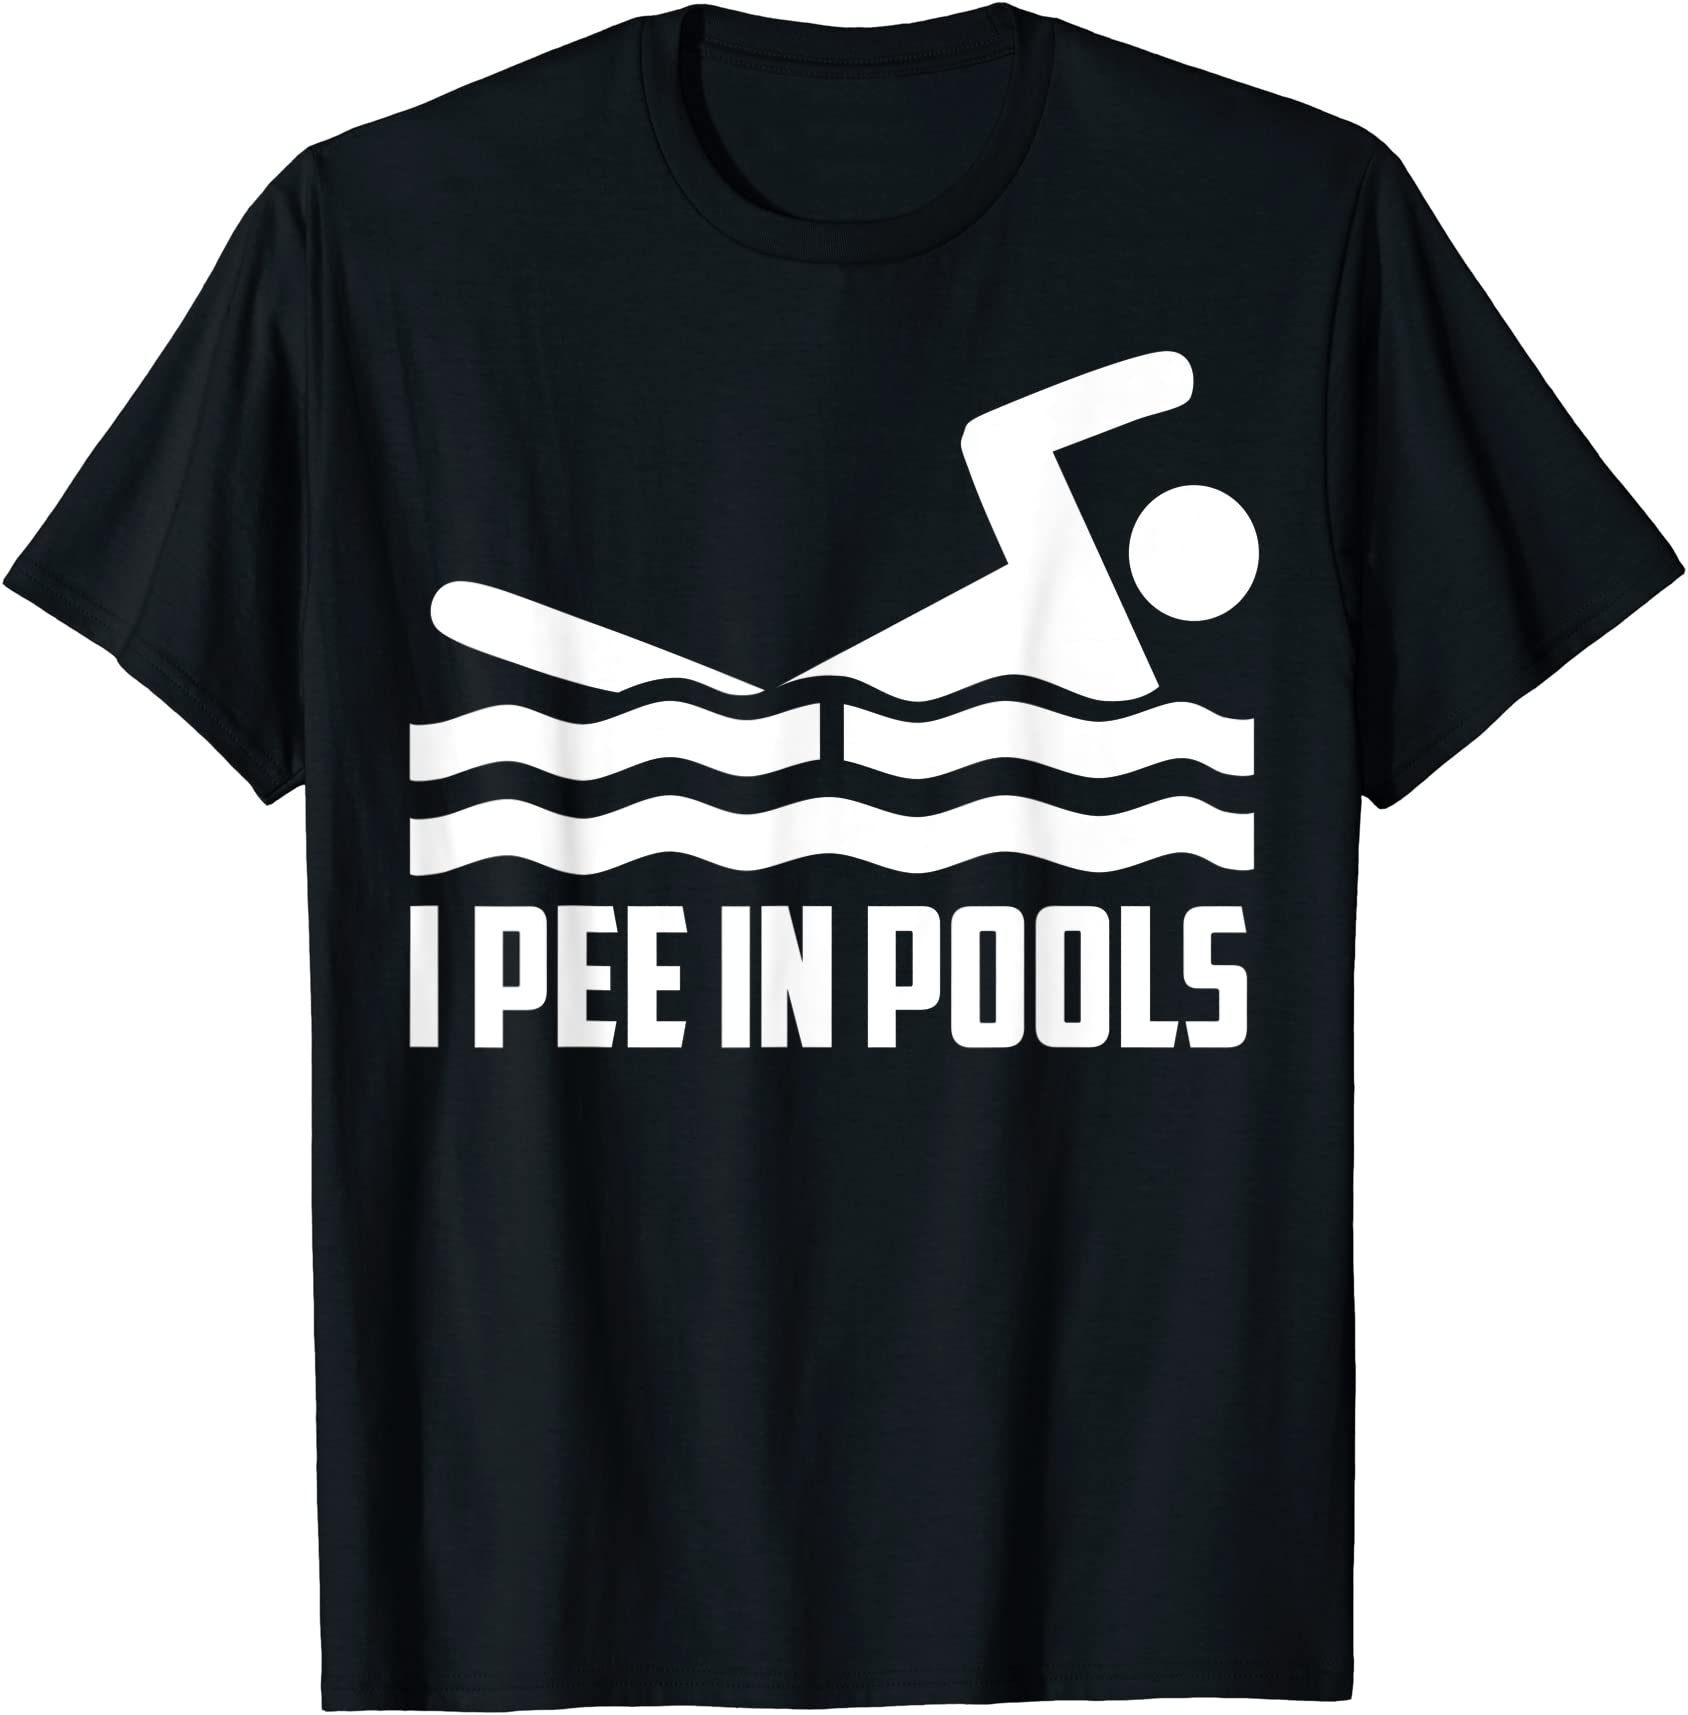 i pee in pools cool present for family and friends t shirt men - Buy t ...